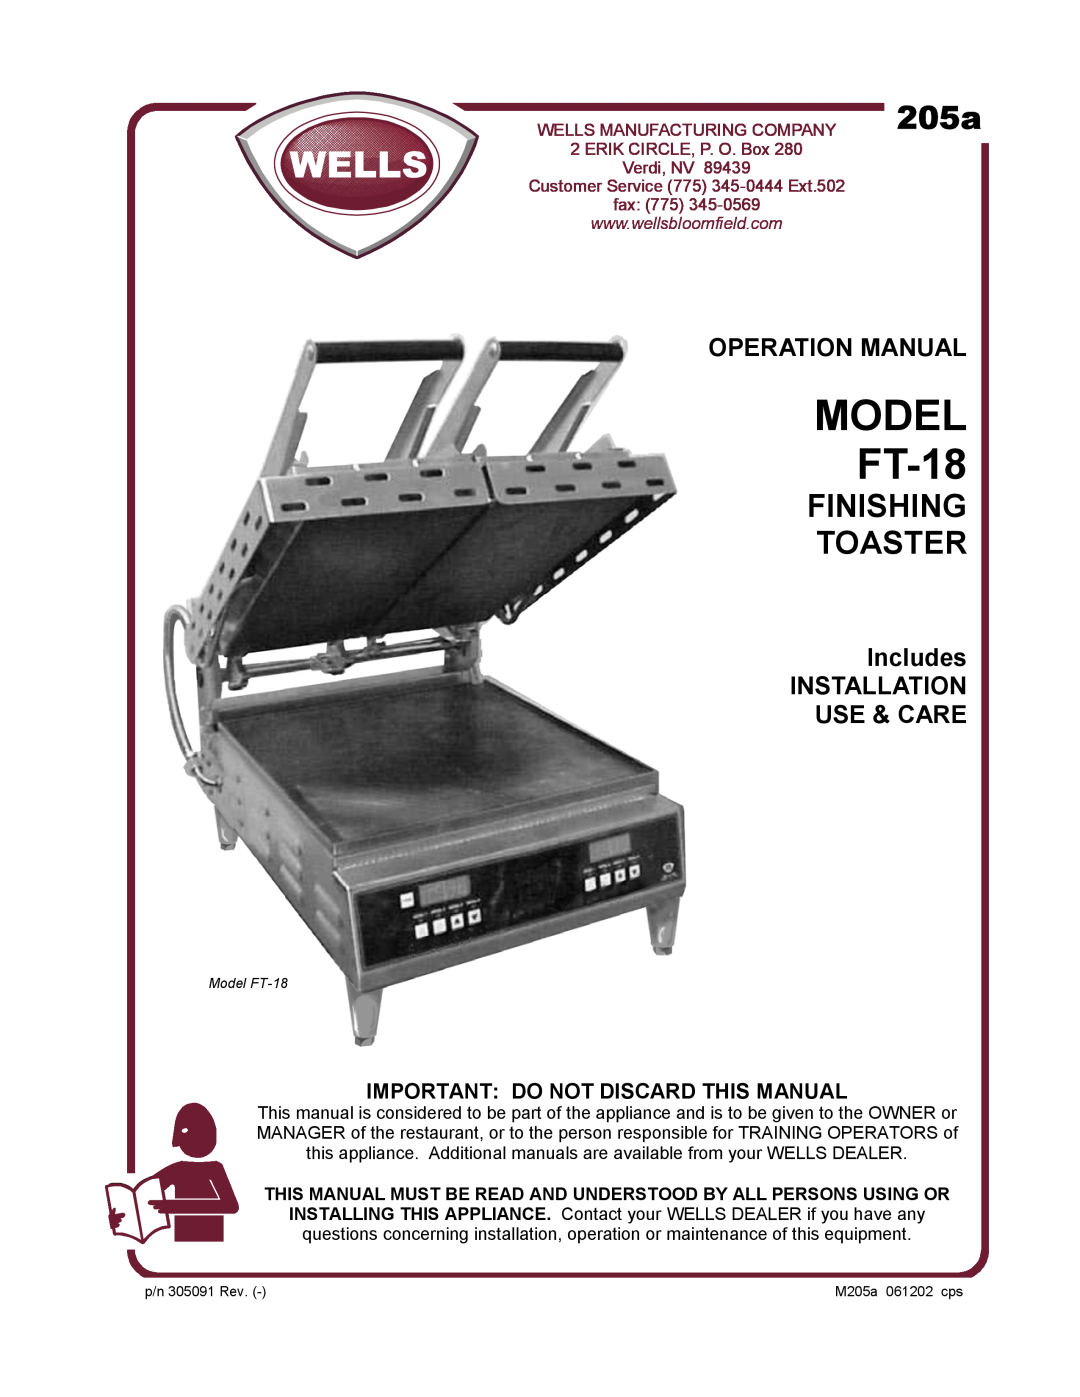 Wells operation manual Includes INSTALLATION USE & CARE, Important Do Not Discard This Manual, MODEL FT-18, 205a, fax 